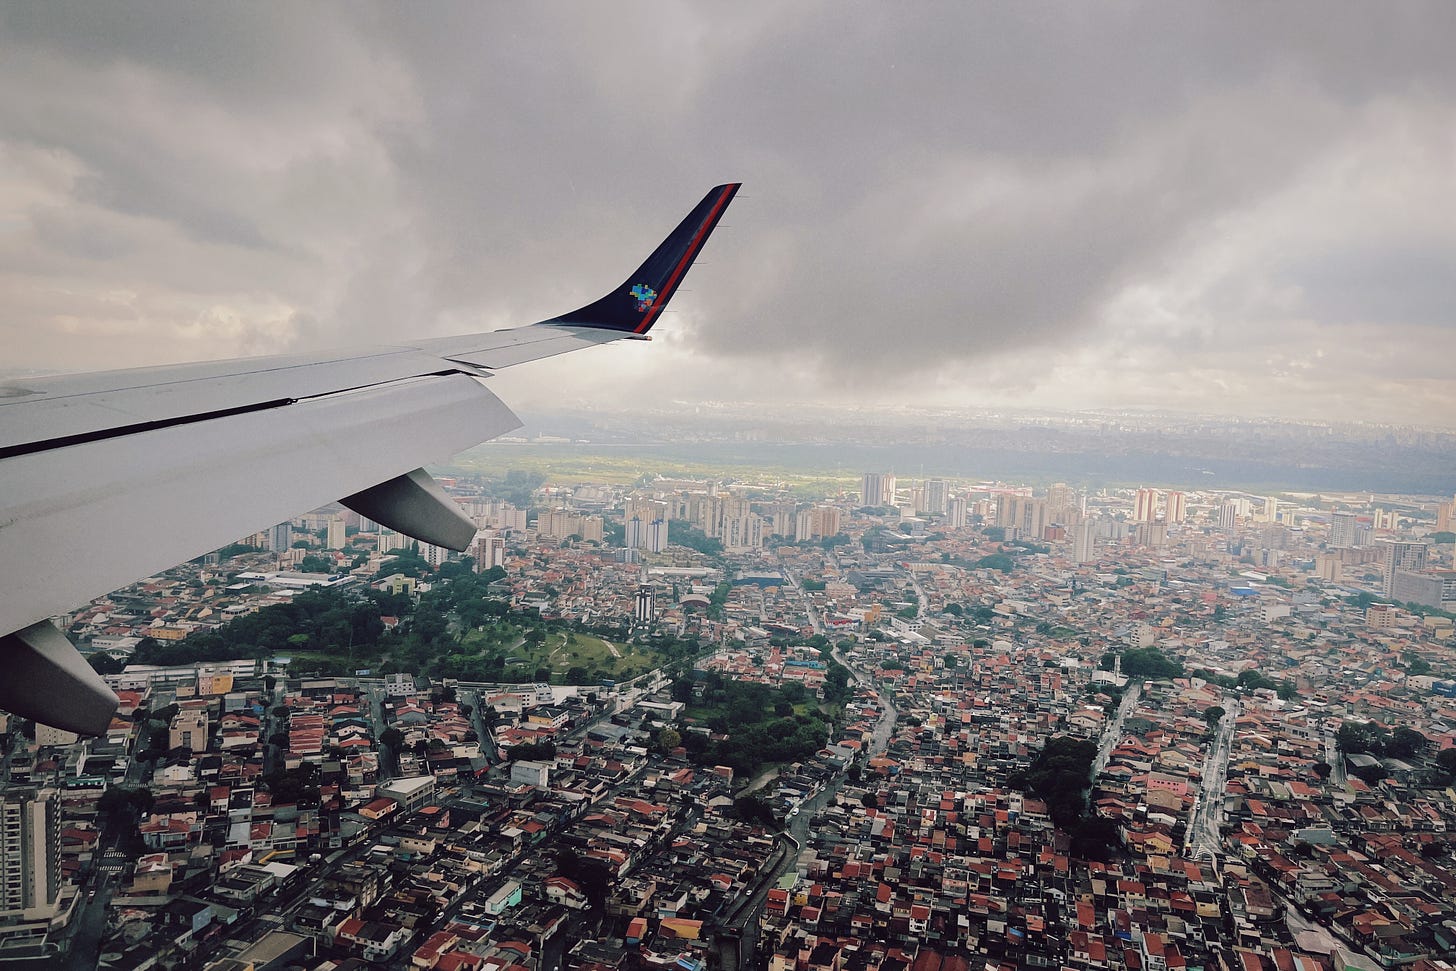 Photograph of São Paulo, seen from a plane. The wing of the plane is visible on the left side of the image.